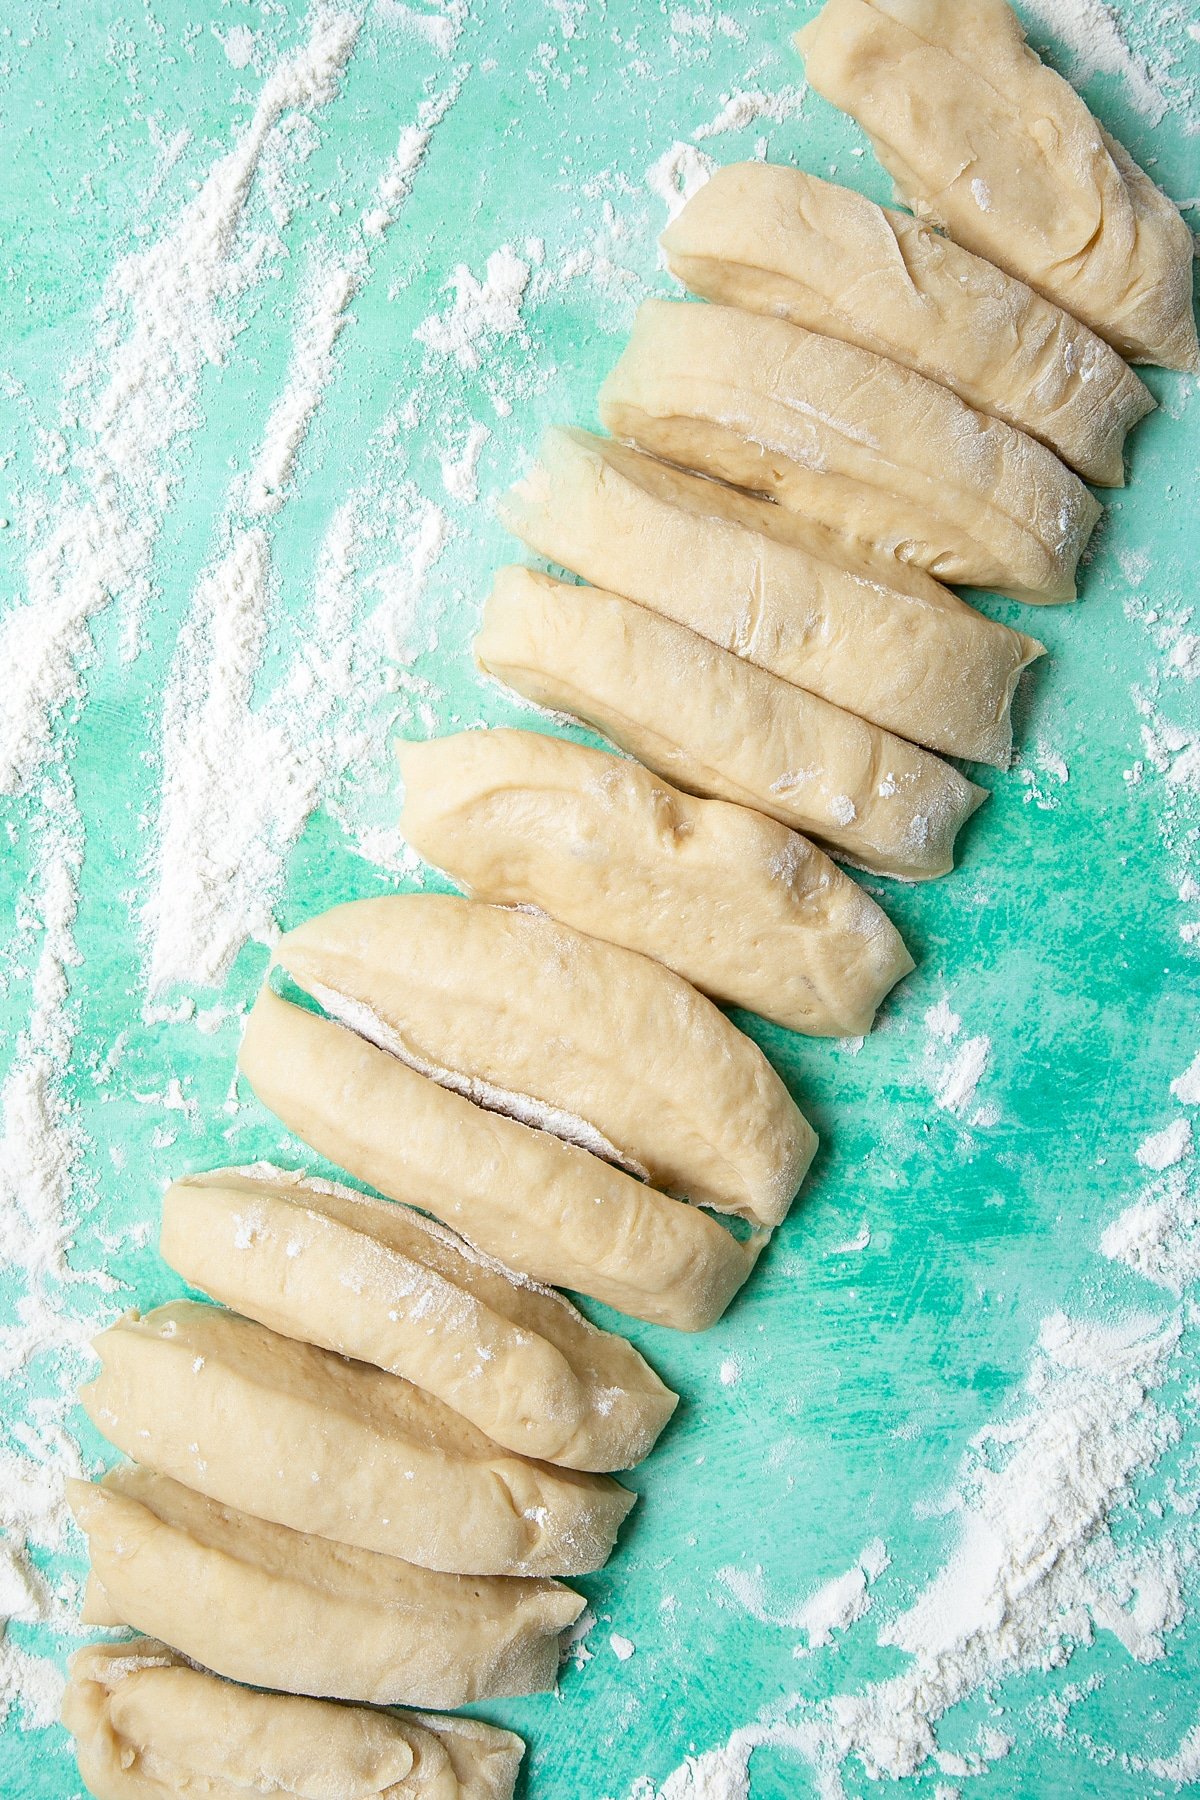 Bread dough rolled into a sausage and cut into 12 pieces on a floured surface.